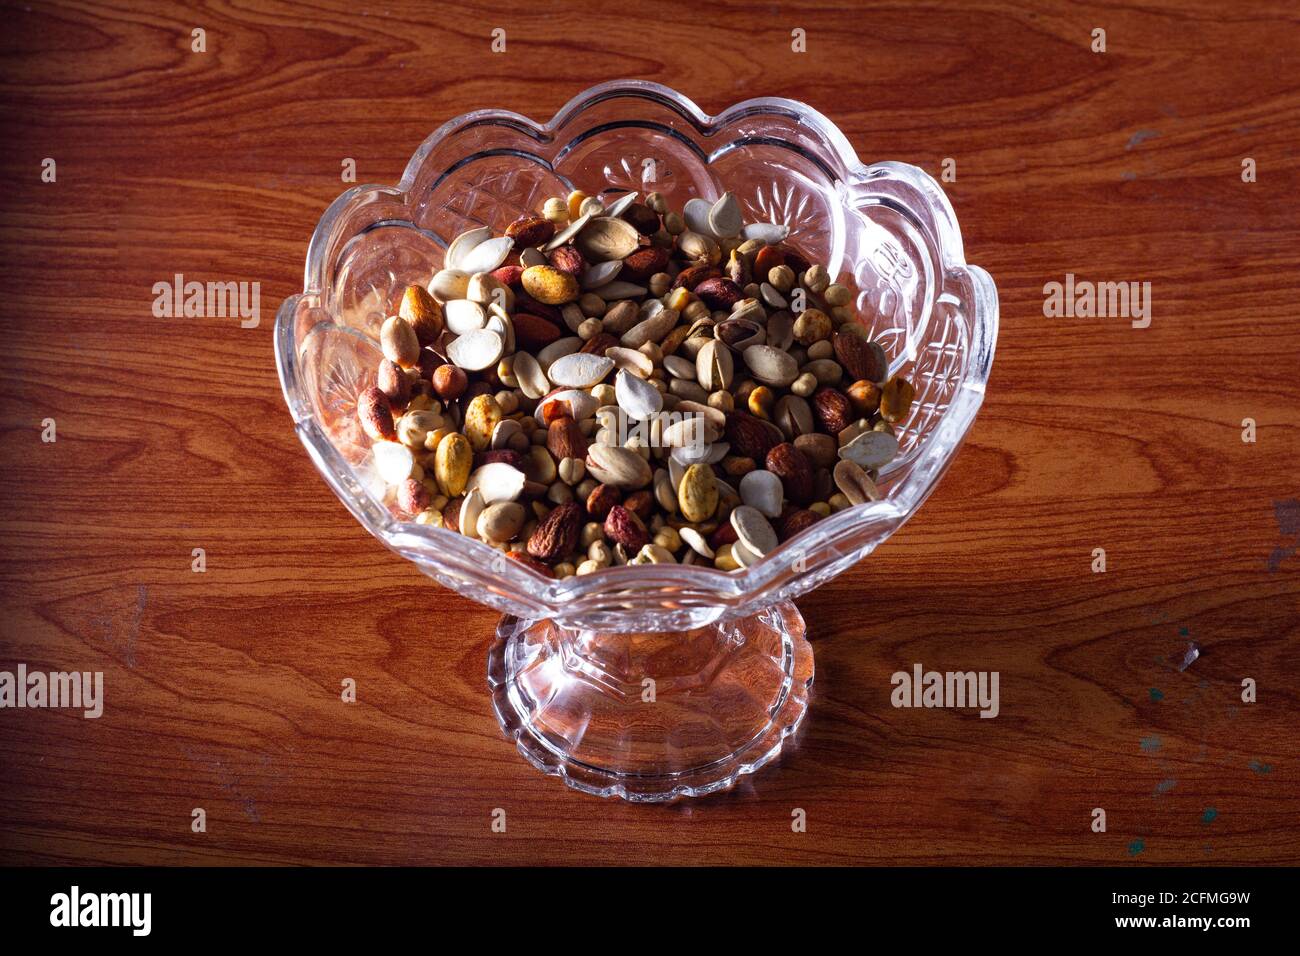 A dry fruits bowl on a table Stock Photo